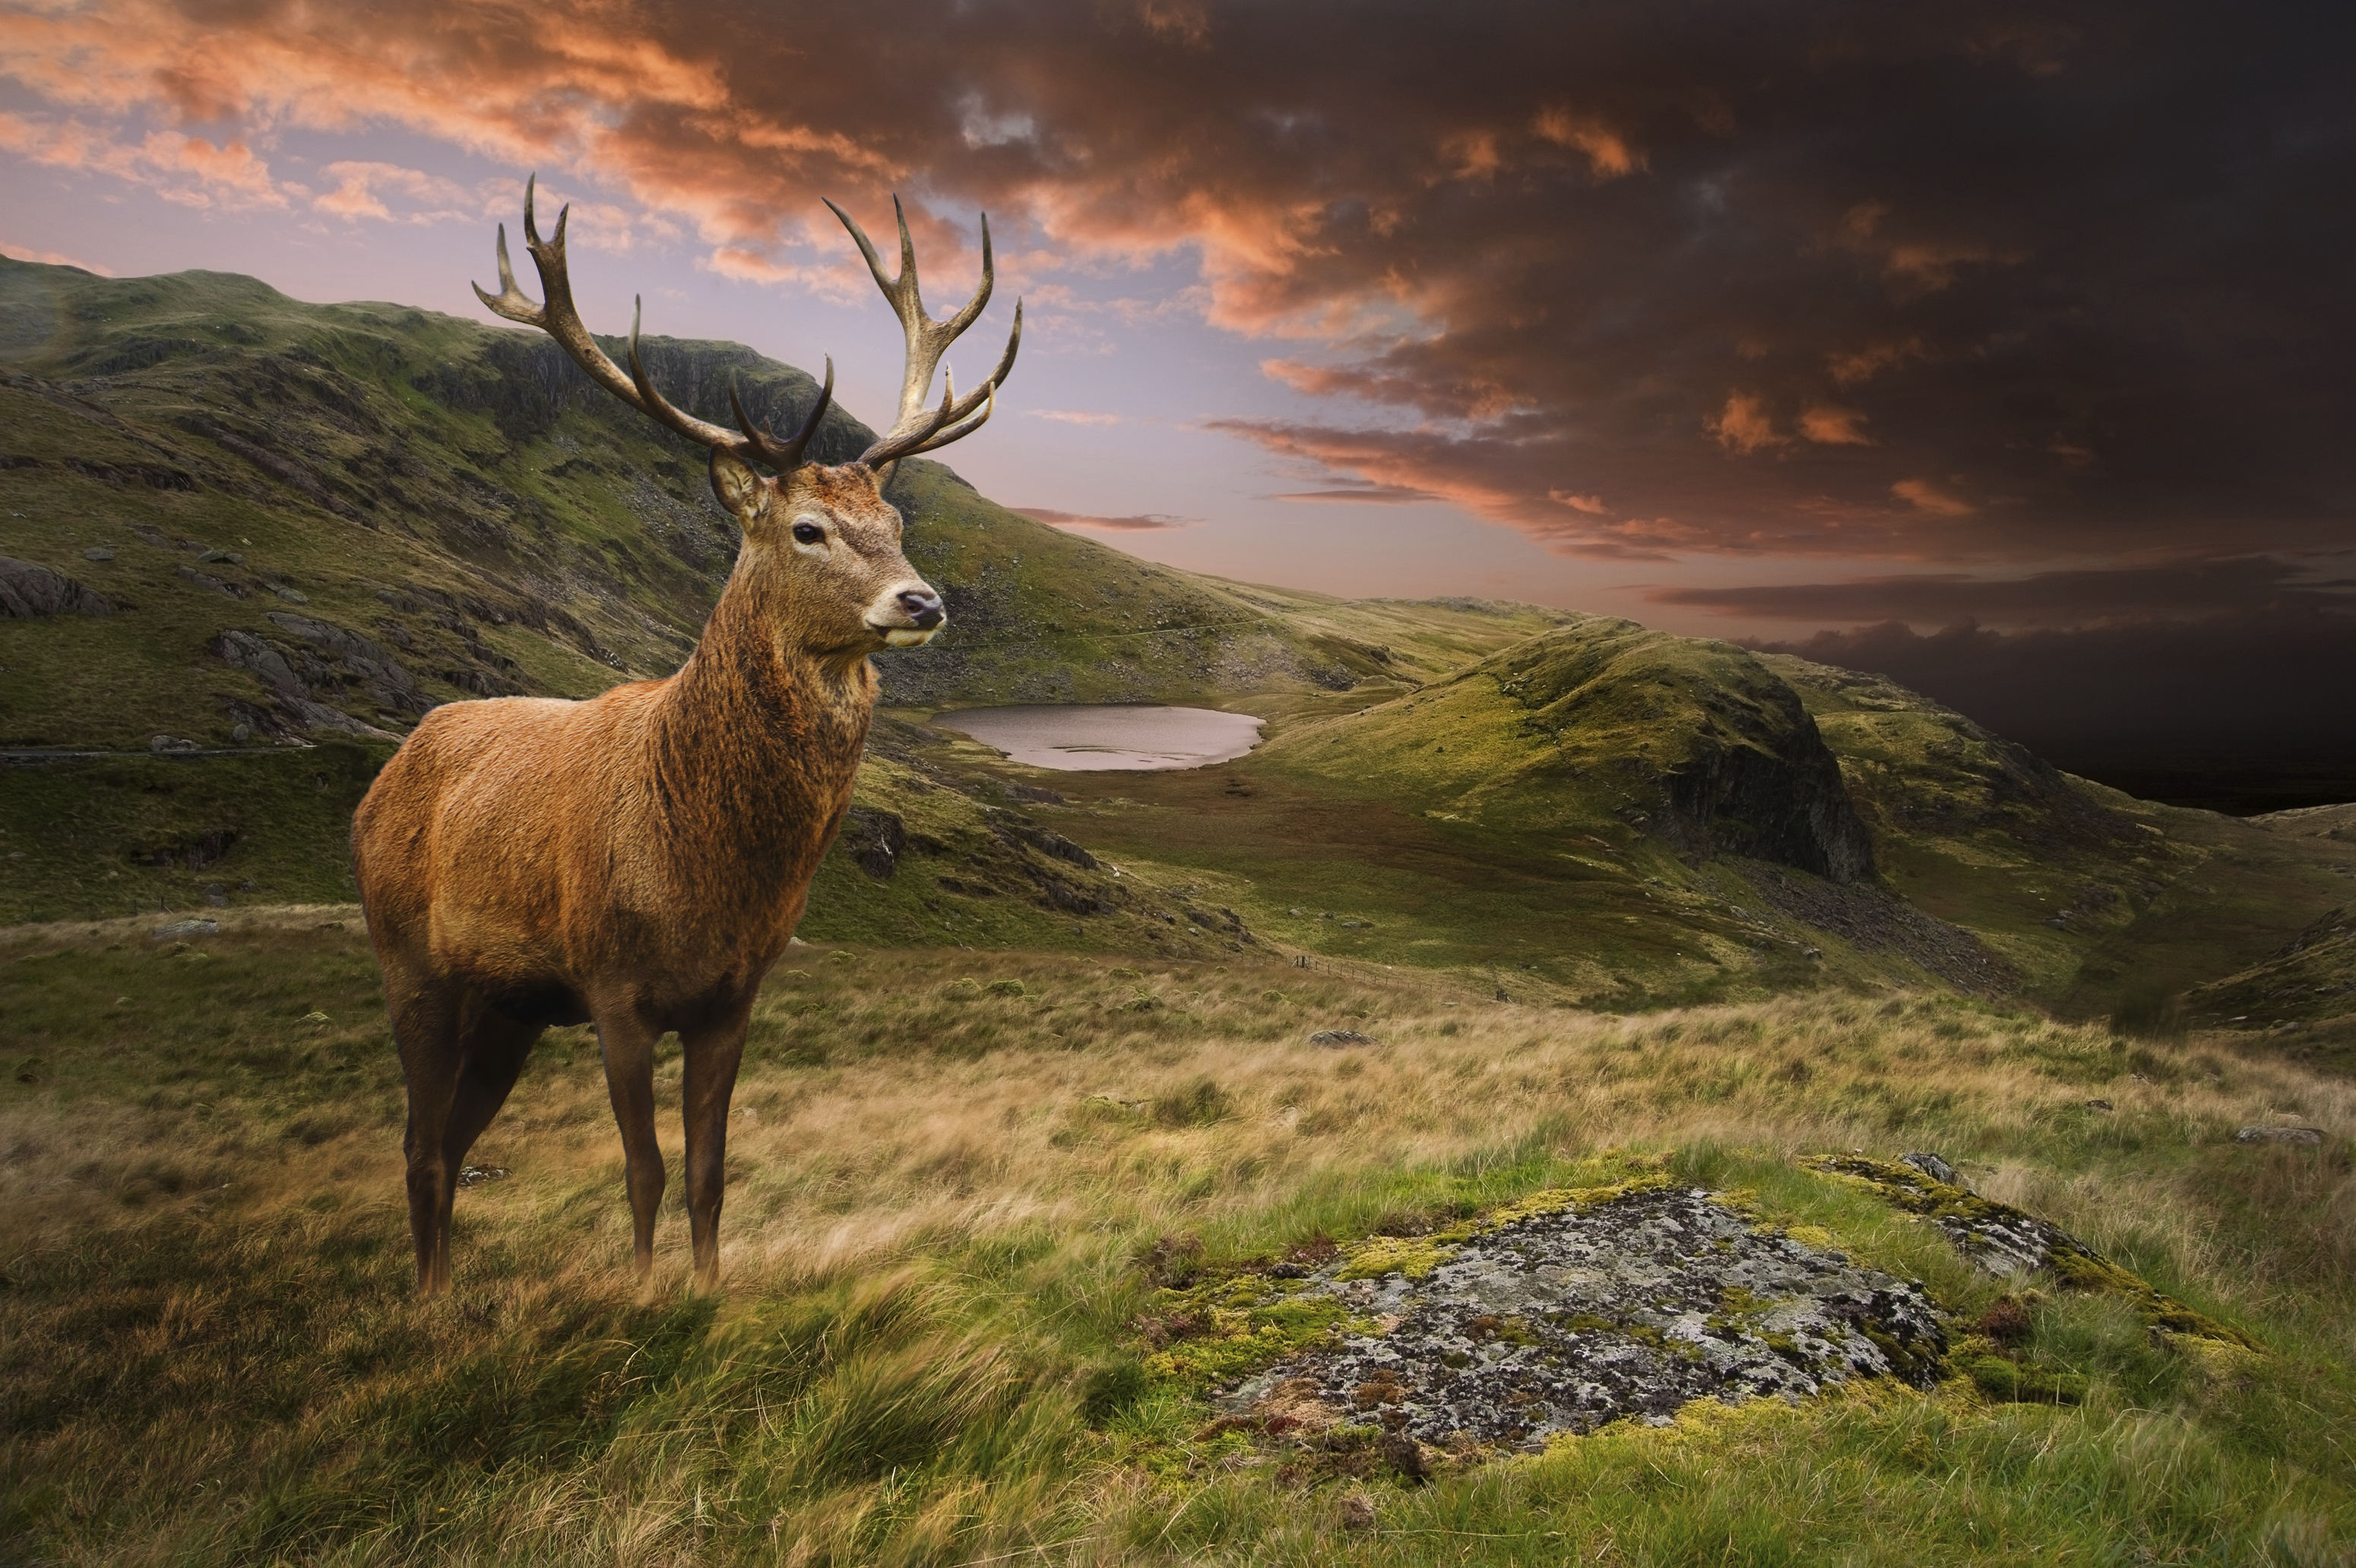 Deer to the islands - News - Cardiff University